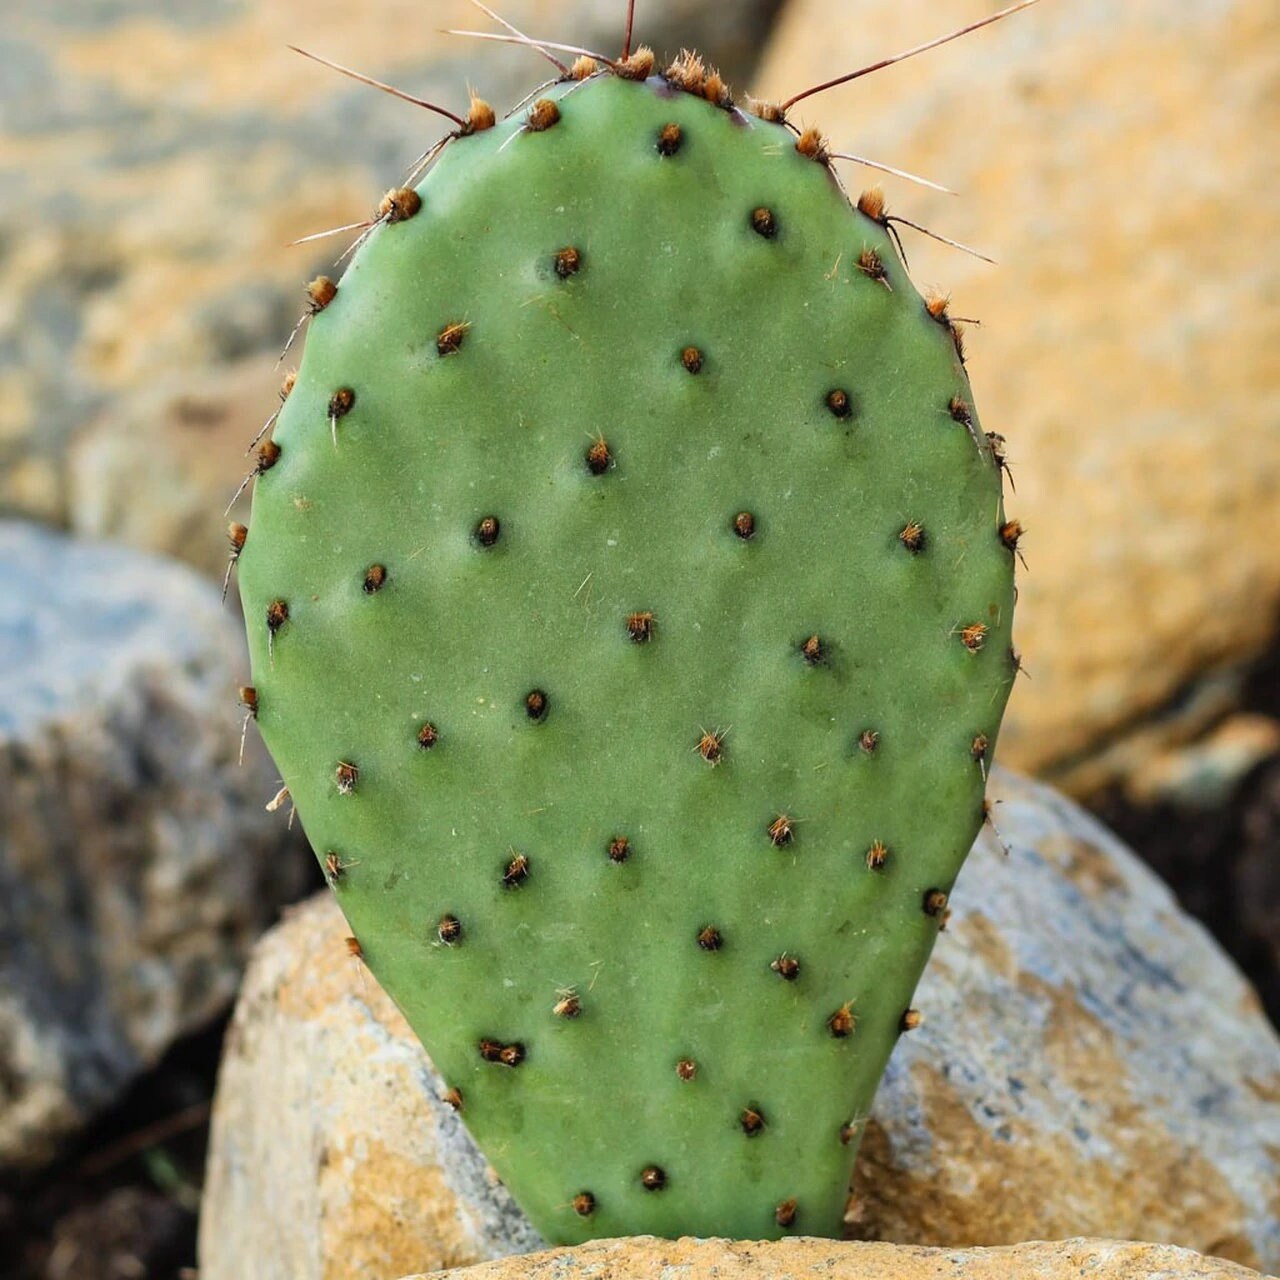 Prickly Pear Cactus 'Wildfire' (O. woodsii hyb) COLD HARDY